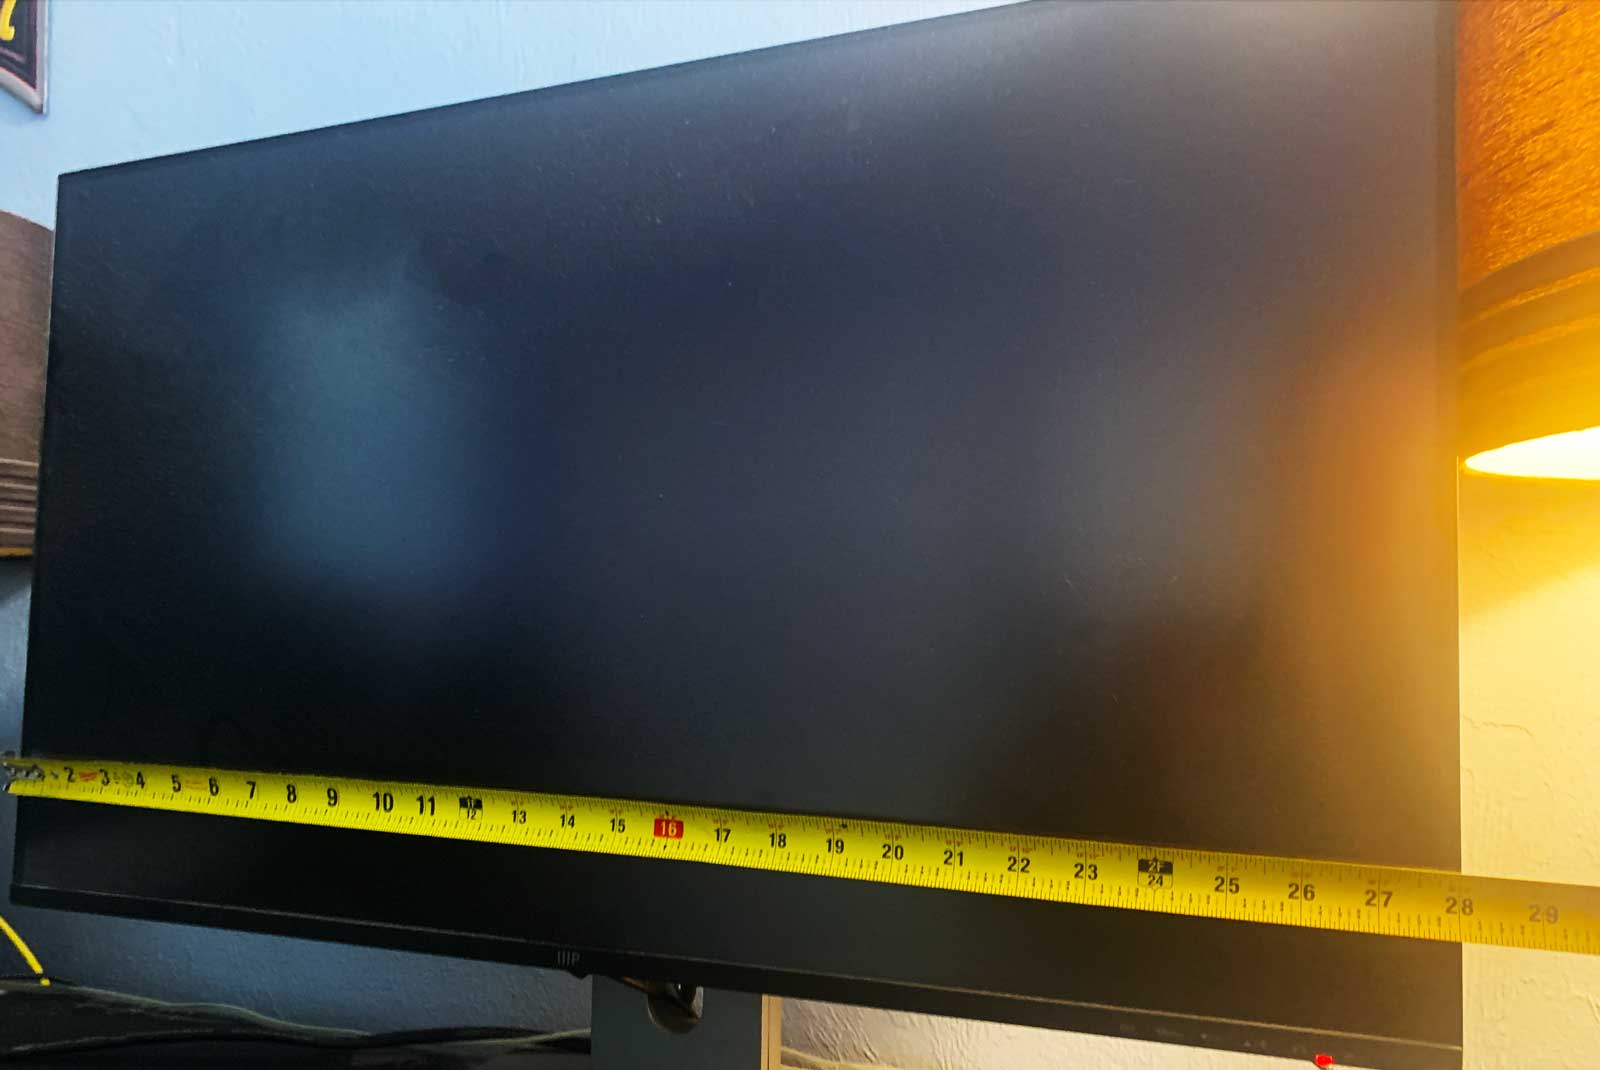 Measure the width of your monitor